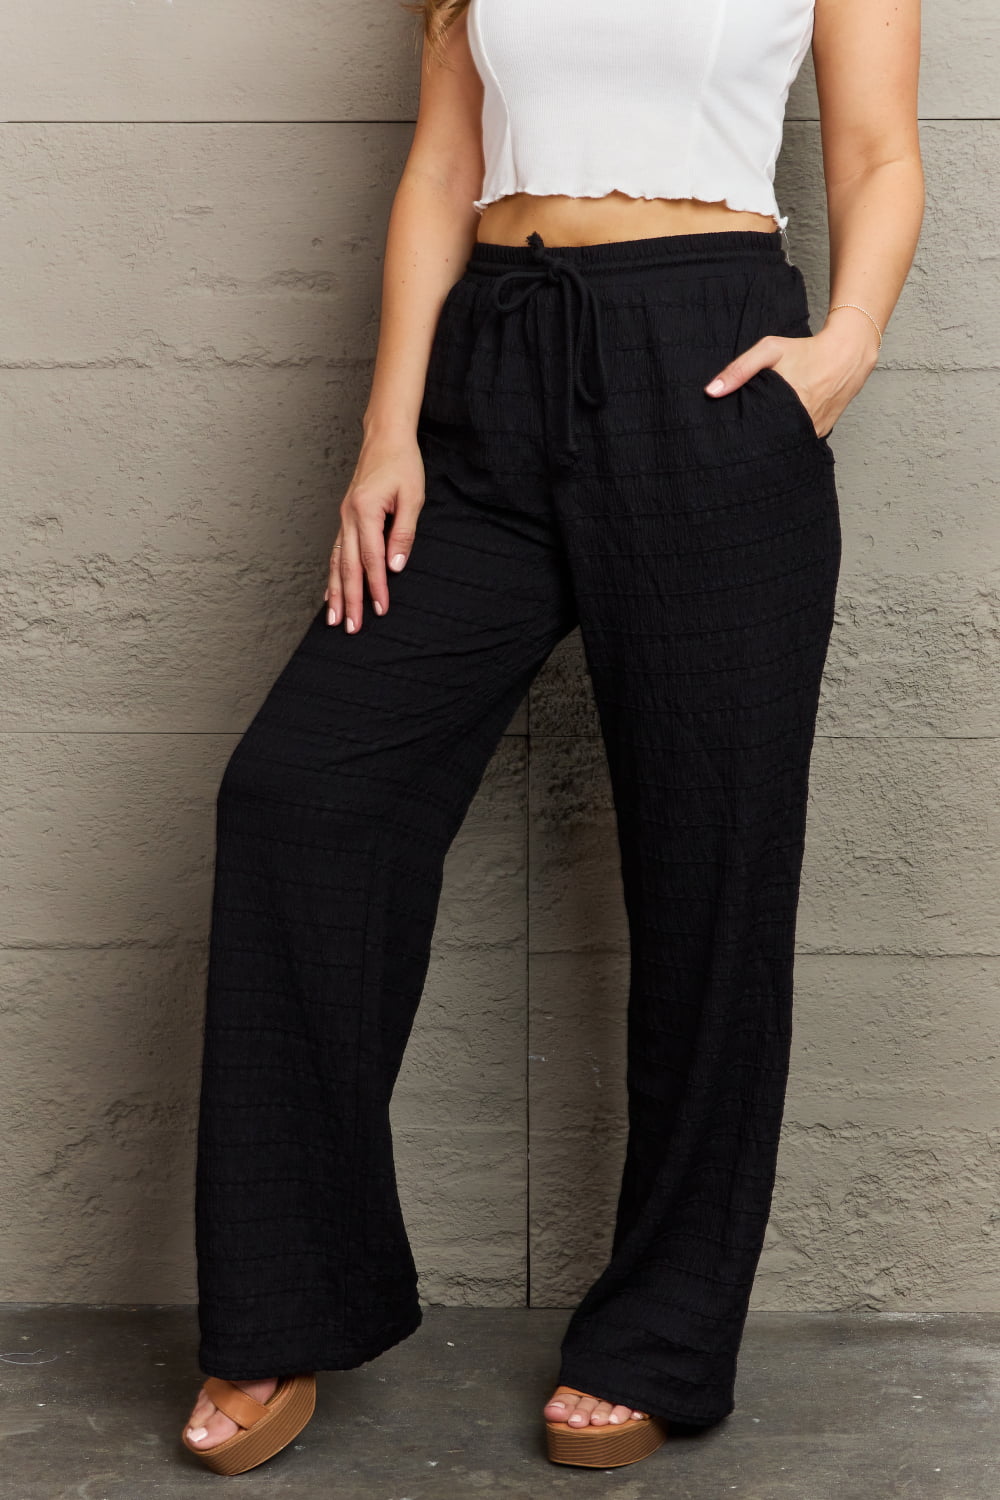 GeeGee Dainty Delights Textured High Waisted Pant in Black